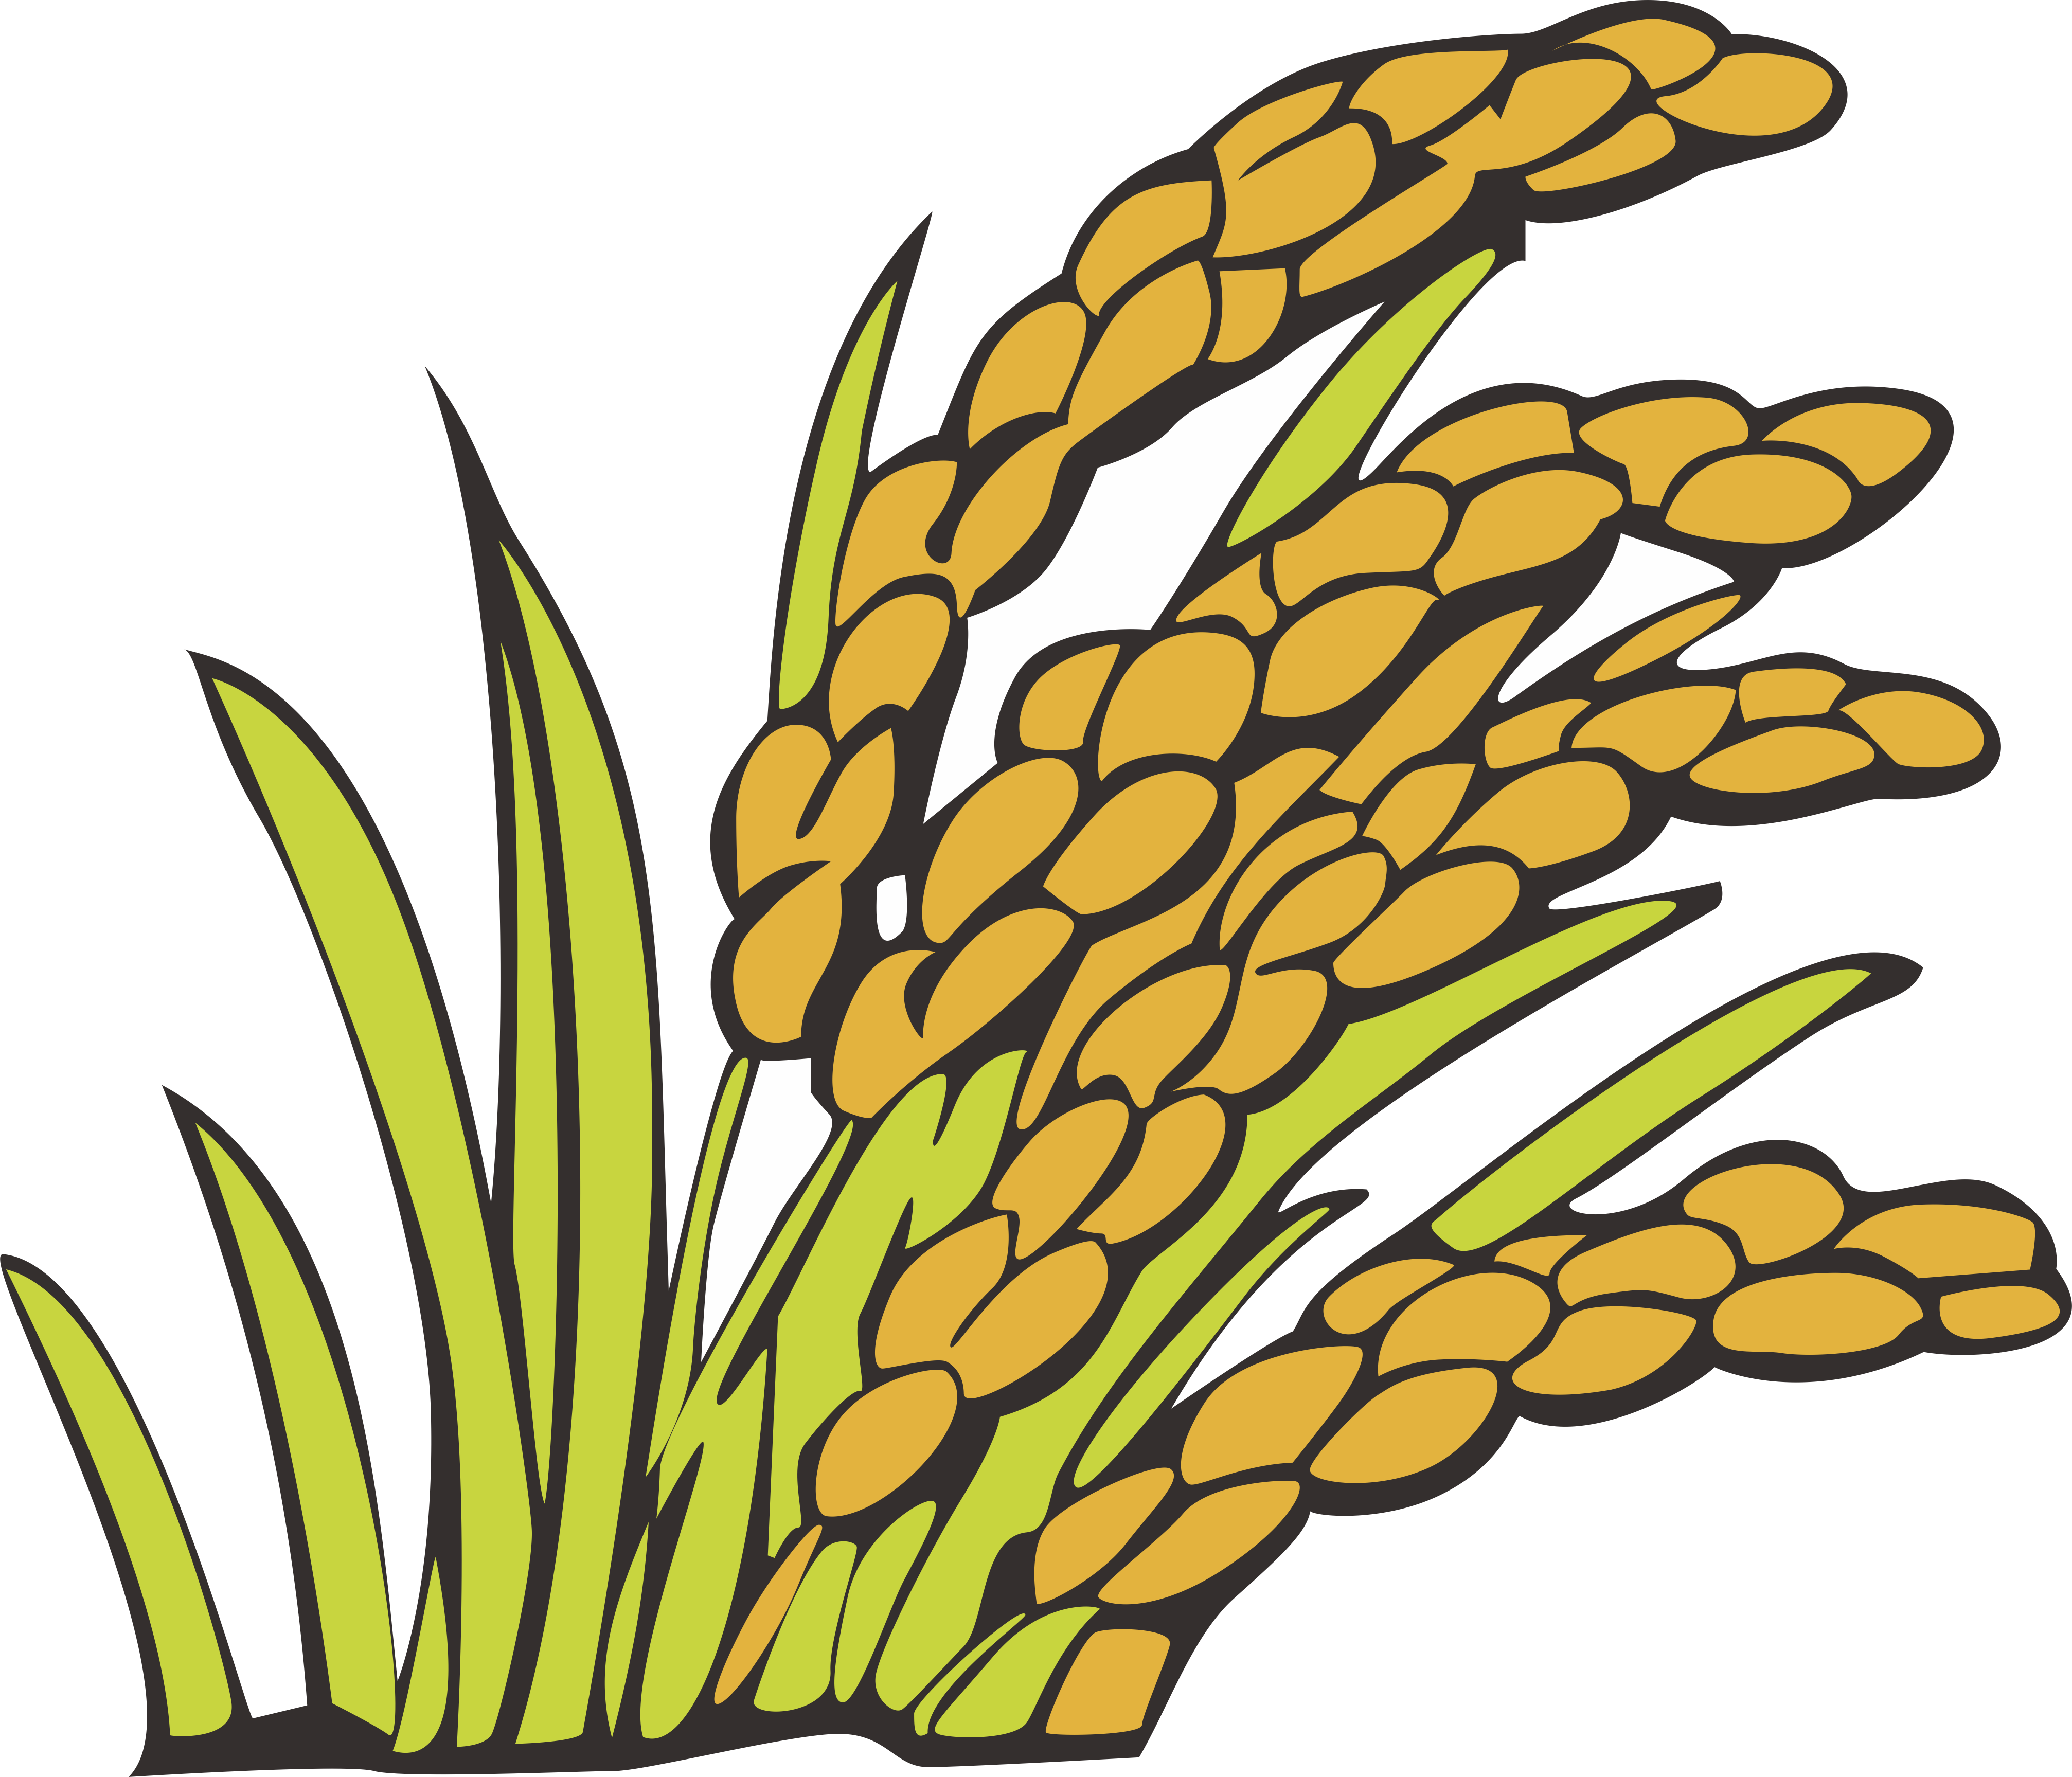 Download and share clipart about Wheat Clipart Bunga Padi - Wheat Clipart B...